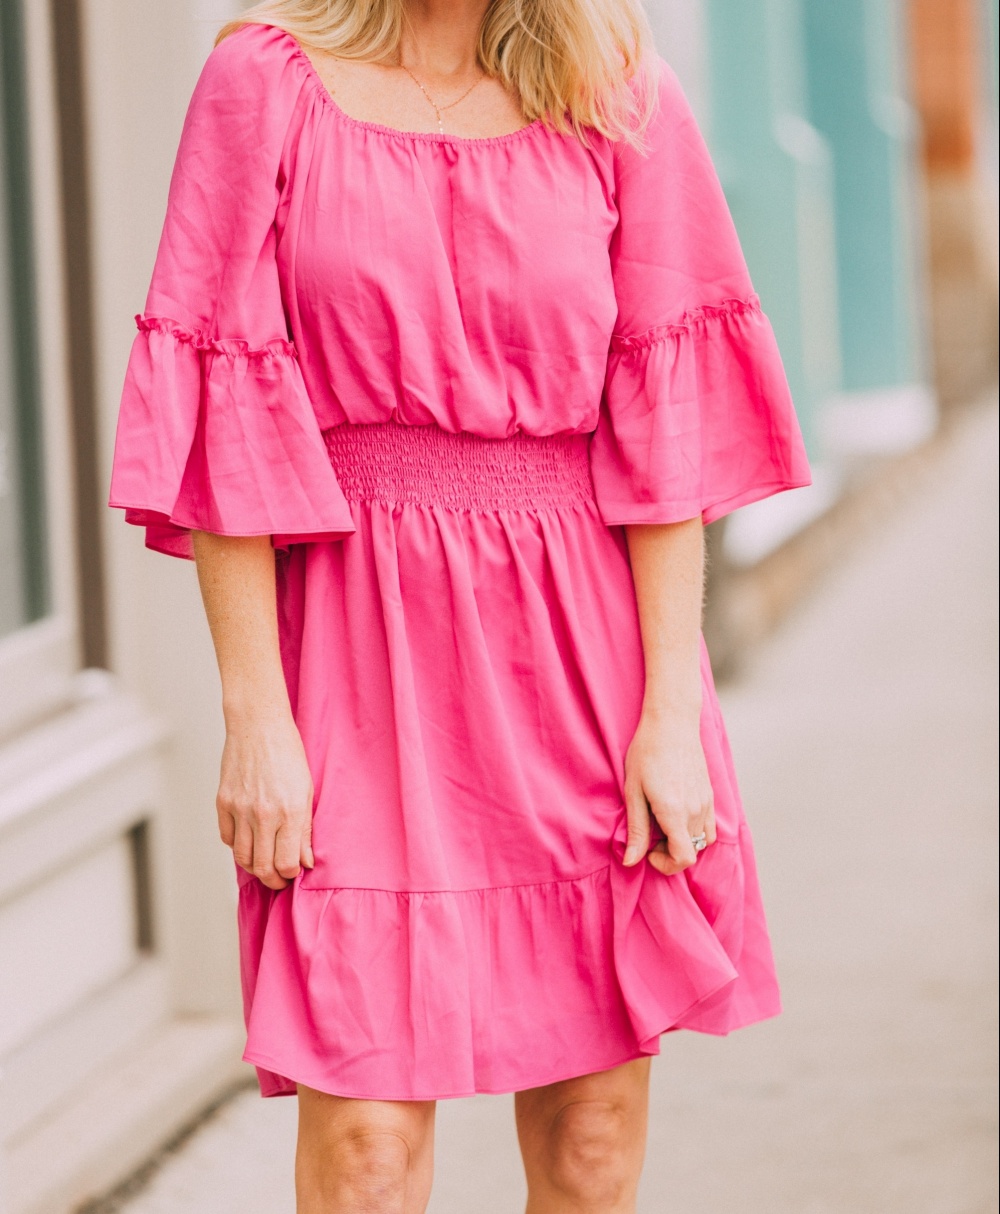 Spring fashion, fashion blogger erin busbee of busbeestyle.com wearing a pink Le Gali off the shoulder dress with Via Spiga white mules from Bloomingdale's in Telluride, CO